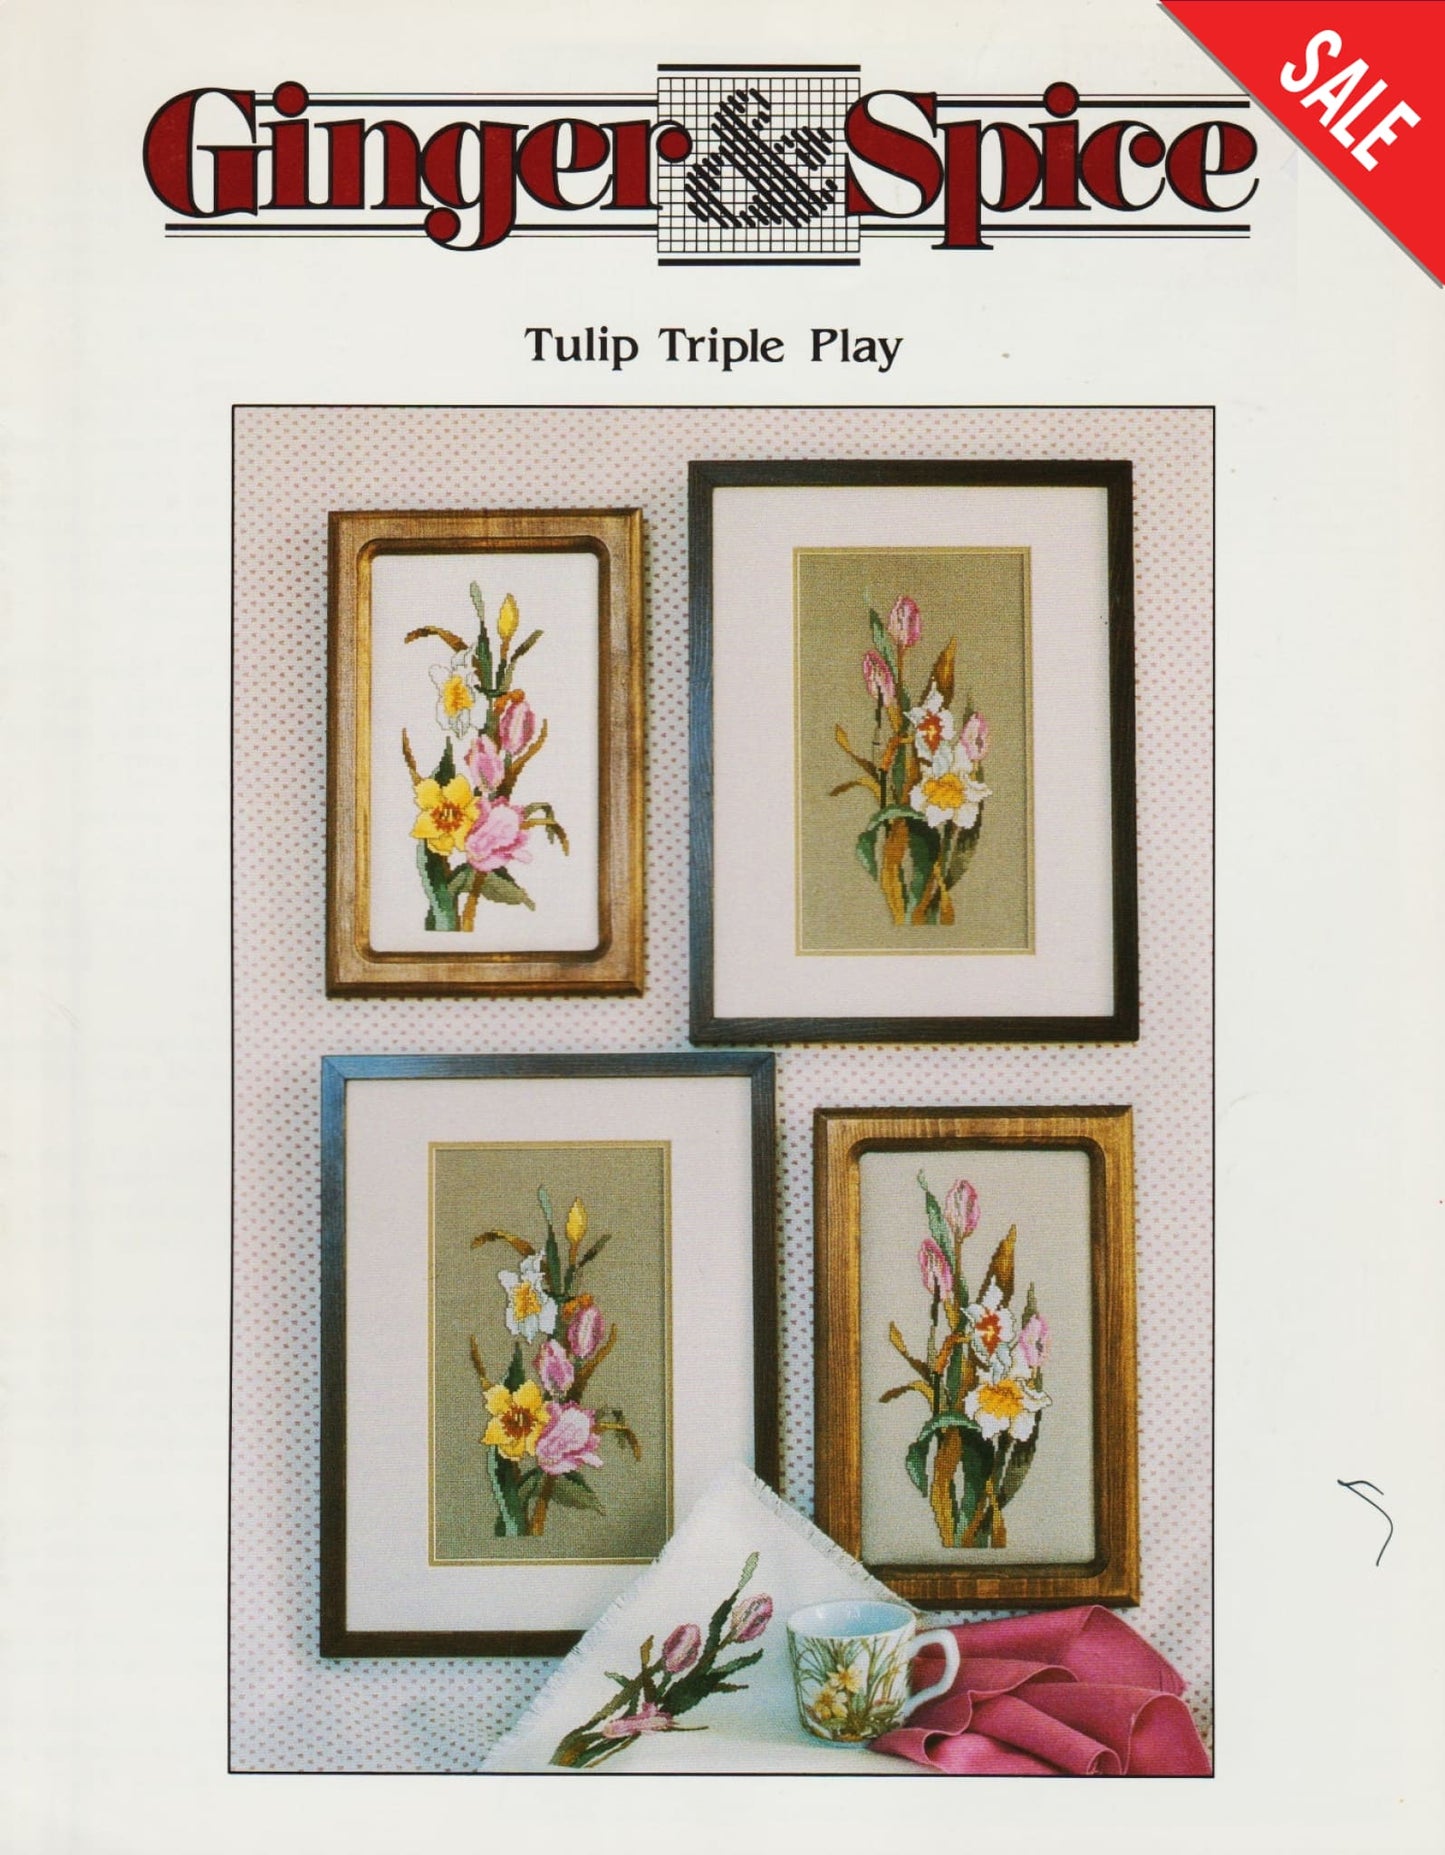 Ginger & Spice Tulip Triple Play cross stitch pattern